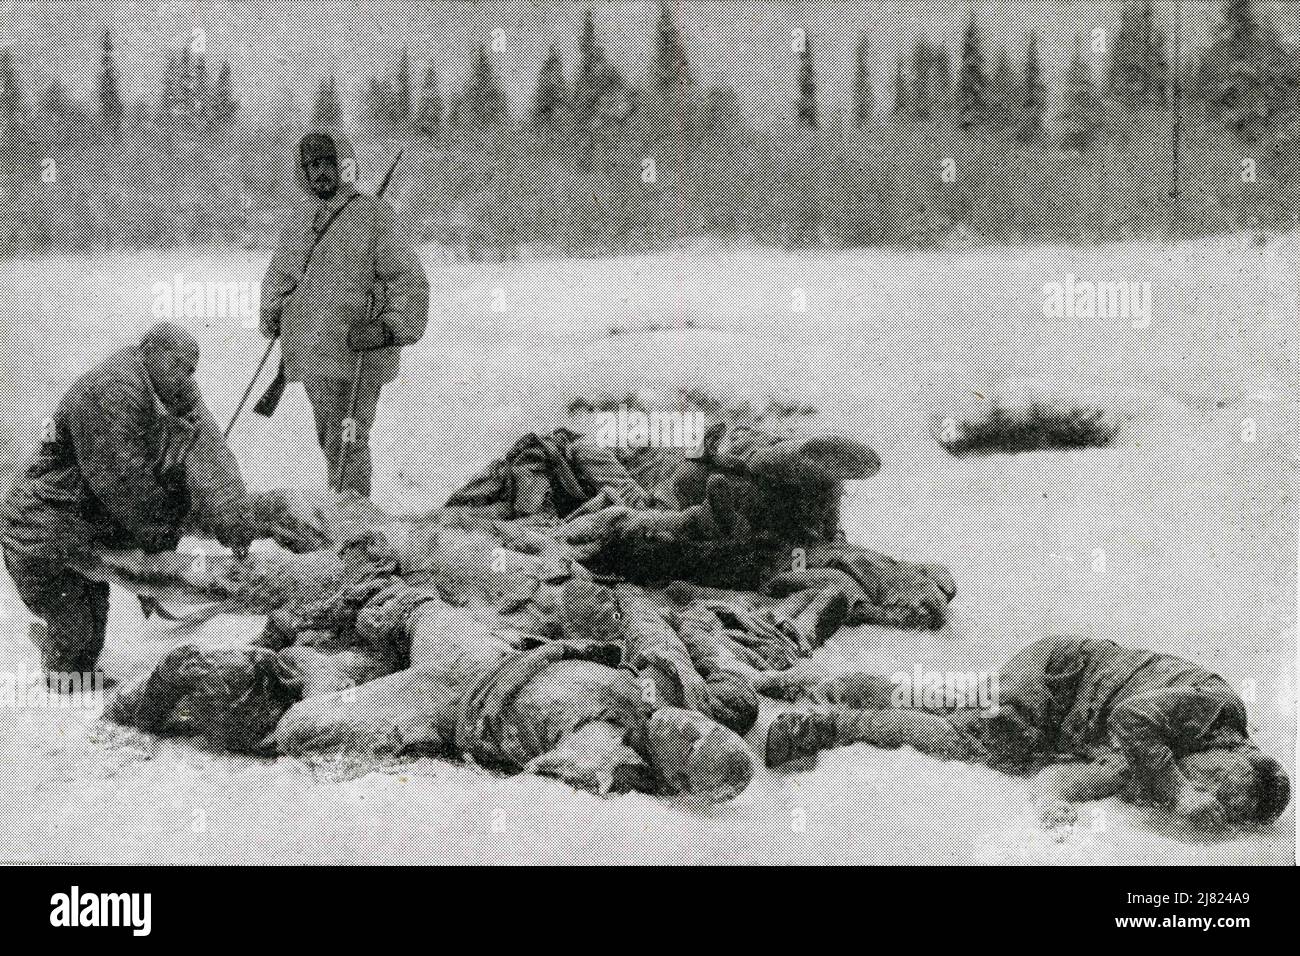 On the Finnish Northern Front in the Russo-Finish War - frozen Russian corpses lying on the ground illustrate the terrible cold in which the opposing armies had to fight. Finland, Europe, dated 31 Dec 1939. Stock Photo